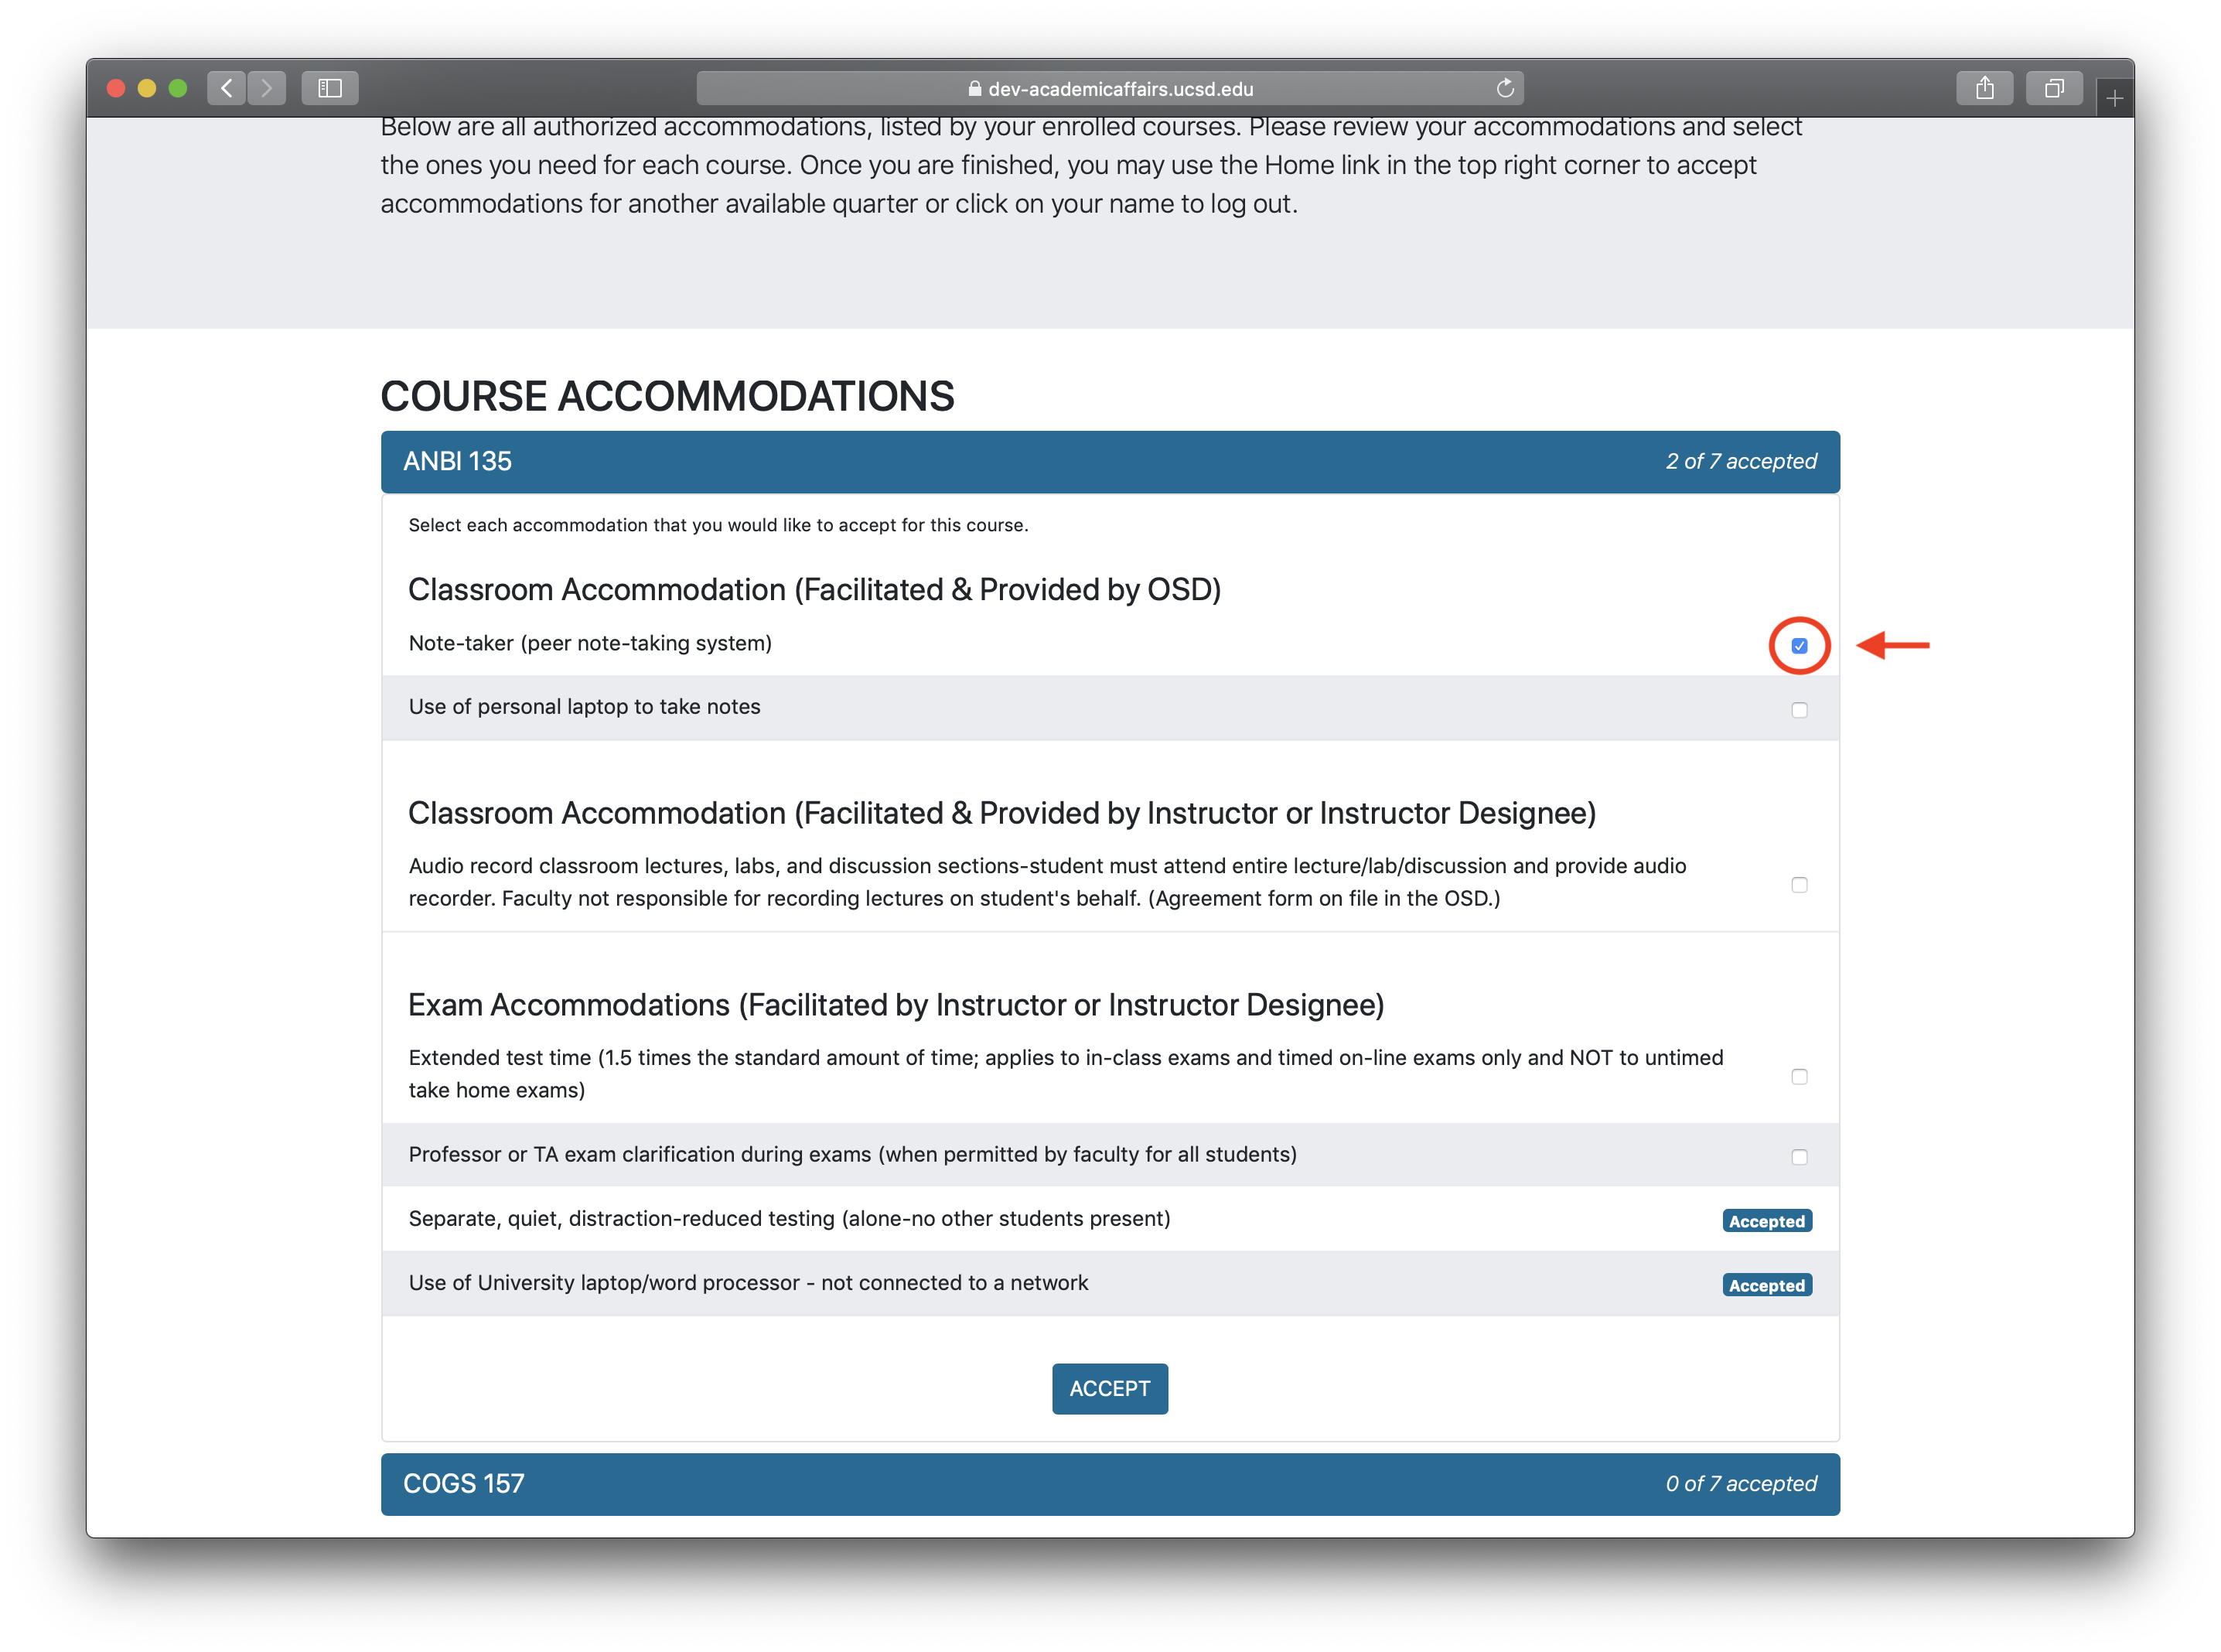 Screenshot of course accommodations with a selected checkbox, and two accommodations below already accepted.